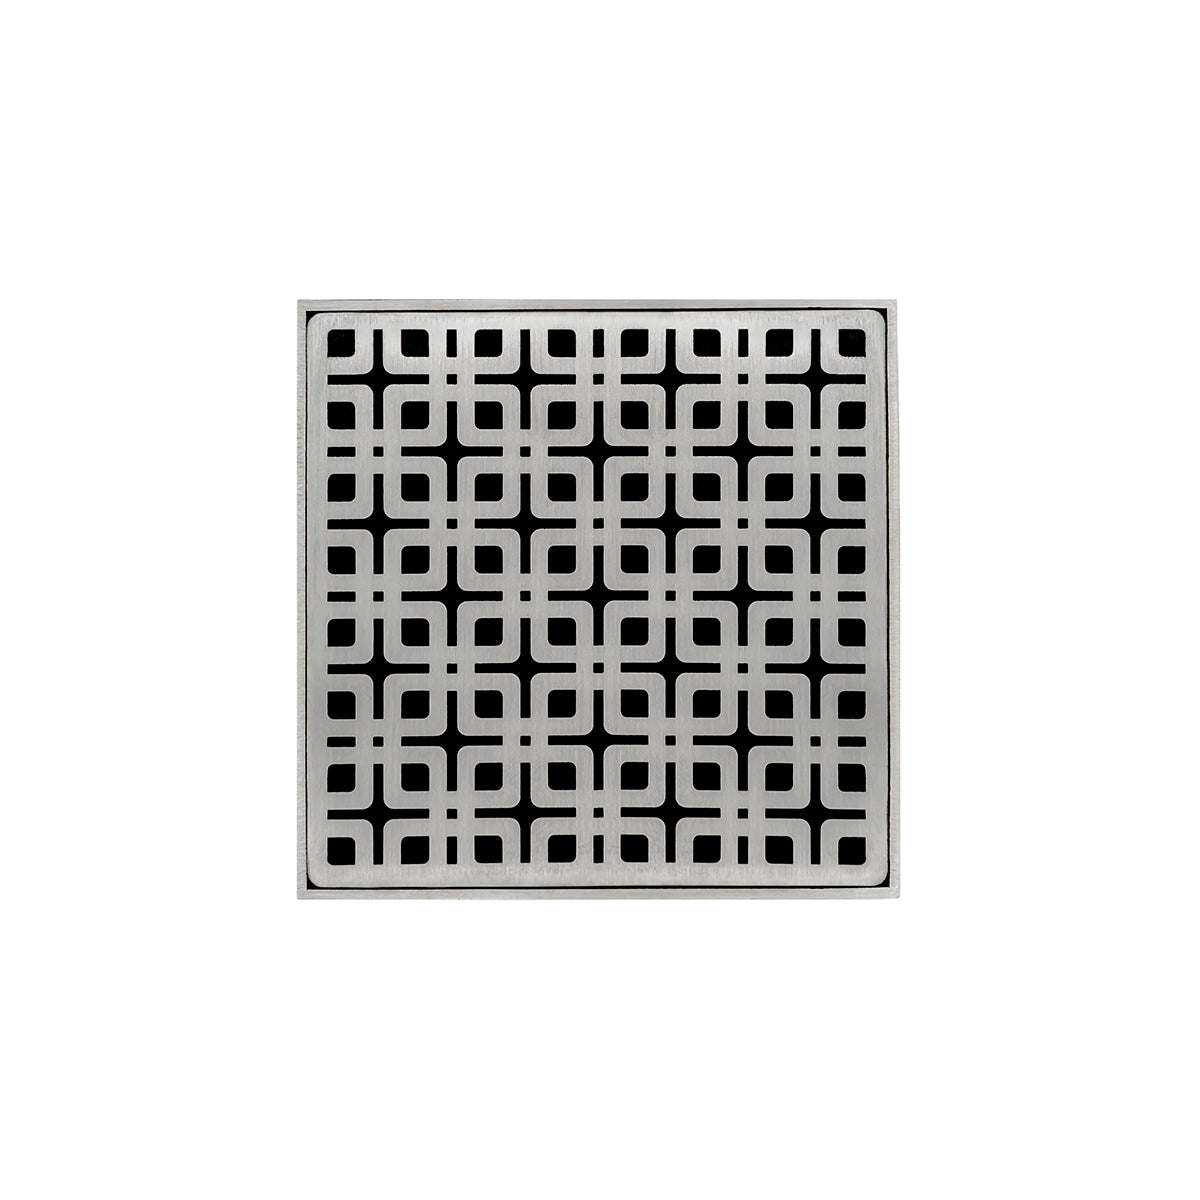 Infinity Drain 5" x 5" KD 5 Premium Center Drain Kit with Link Pattern Decorative Plate with Cast Iron Drain Body for Hot Mop, 2" Outlet